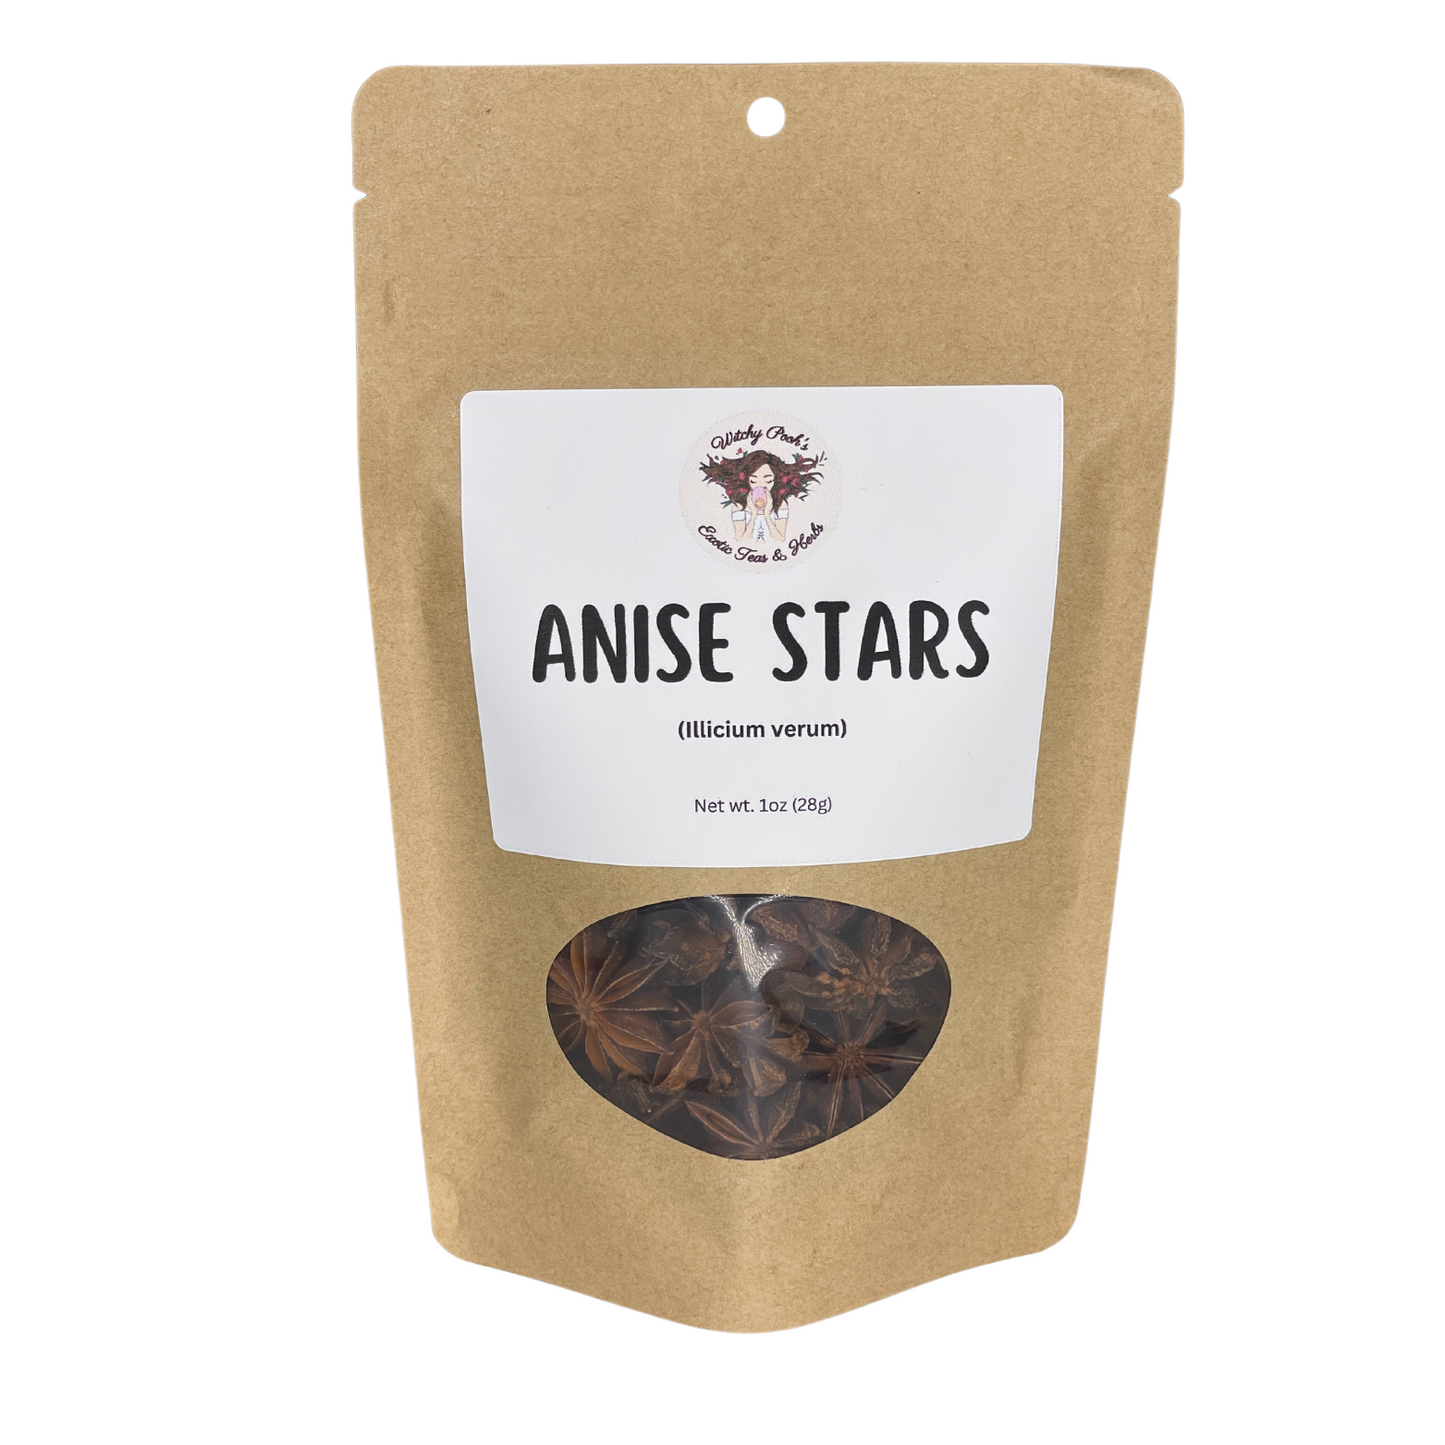 Witchy Pooh's Anise Stars Whole High Quality Strong Smell for Simmer Pots, Cooking and Ritual-4